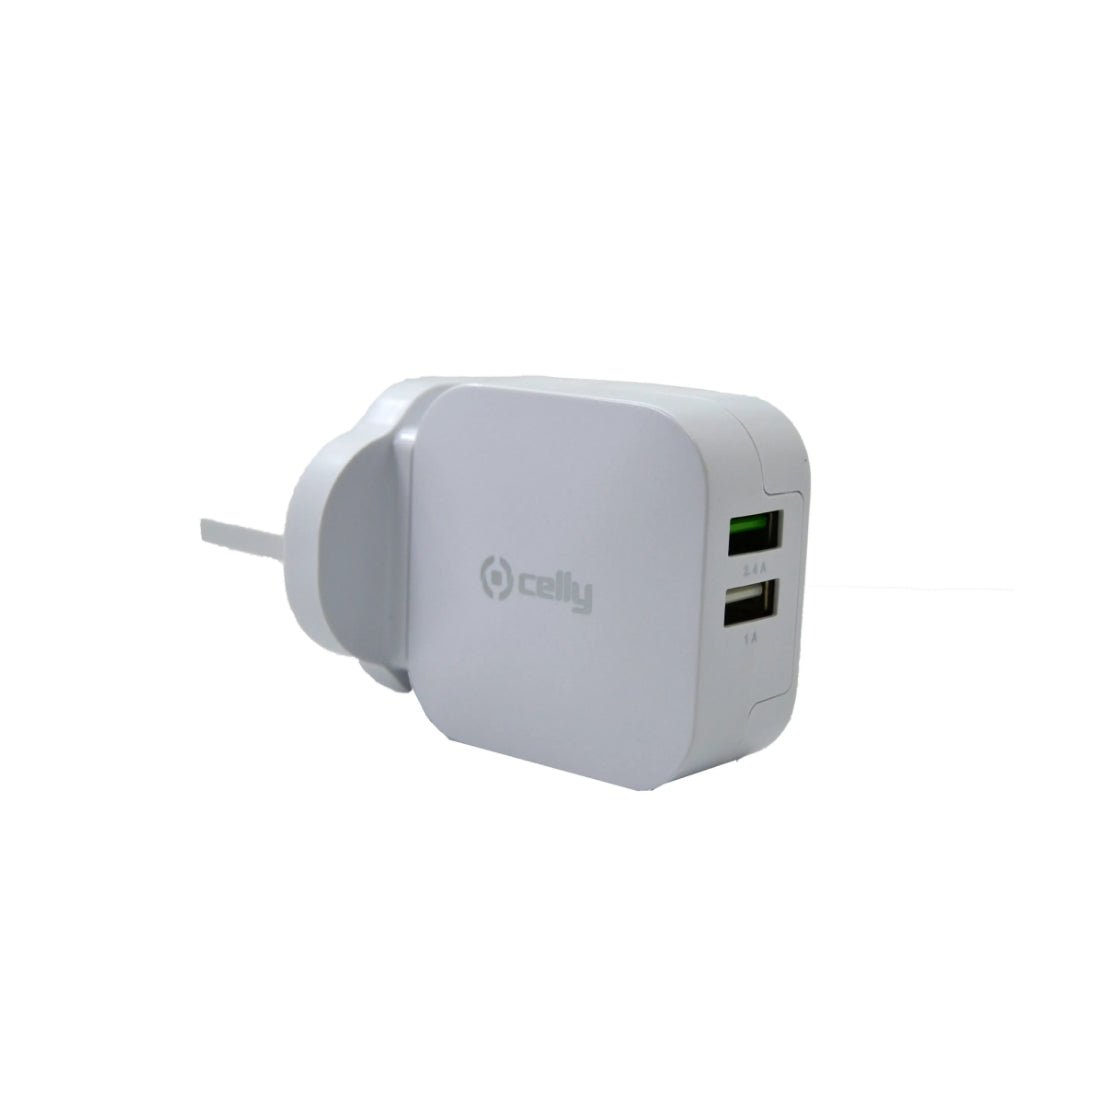 Celly Travel Turbo Charger with 2 USB 3.4 Ports - White - شاحن - Store 974 | ستور ٩٧٤